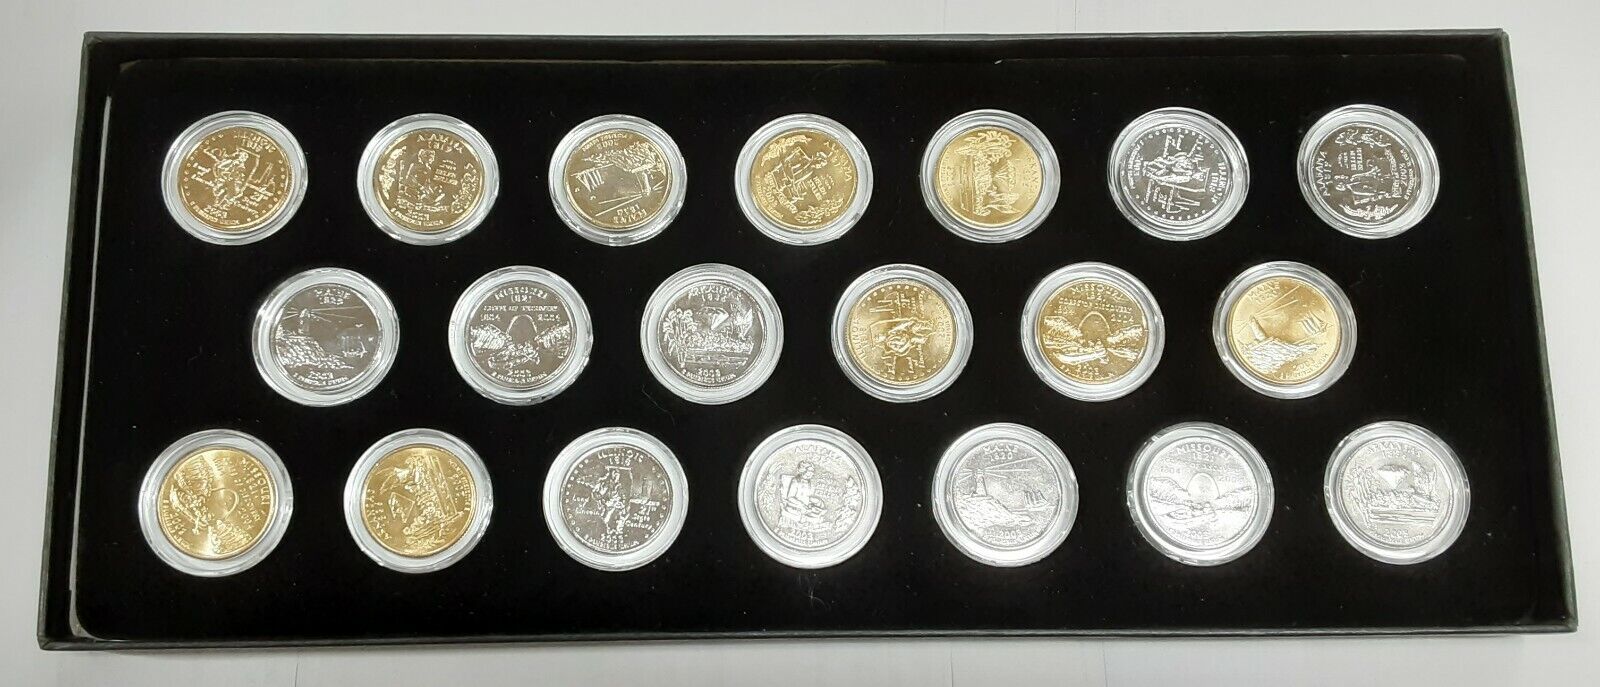 2003 US Statehood Quarters Gold & Silver Plated - 20 Coin Set in Case